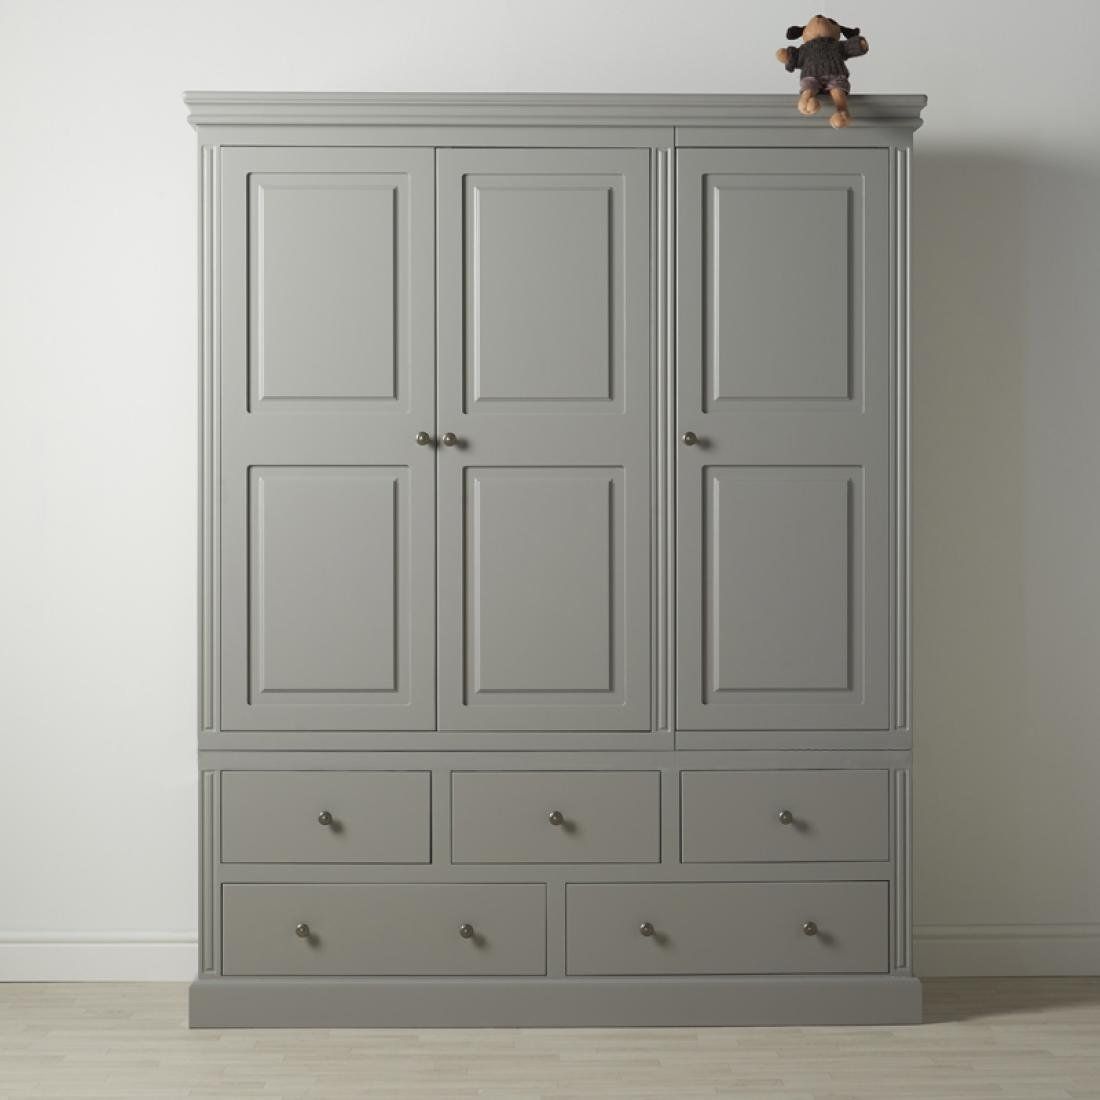 Archie 3 Door 5 Drawer Wardrobe | Boys Wardrobes | Kids Bedrooms |  Childrens Furniture Intended For Cheap Wardrobes With Drawers (View 6 of 15)